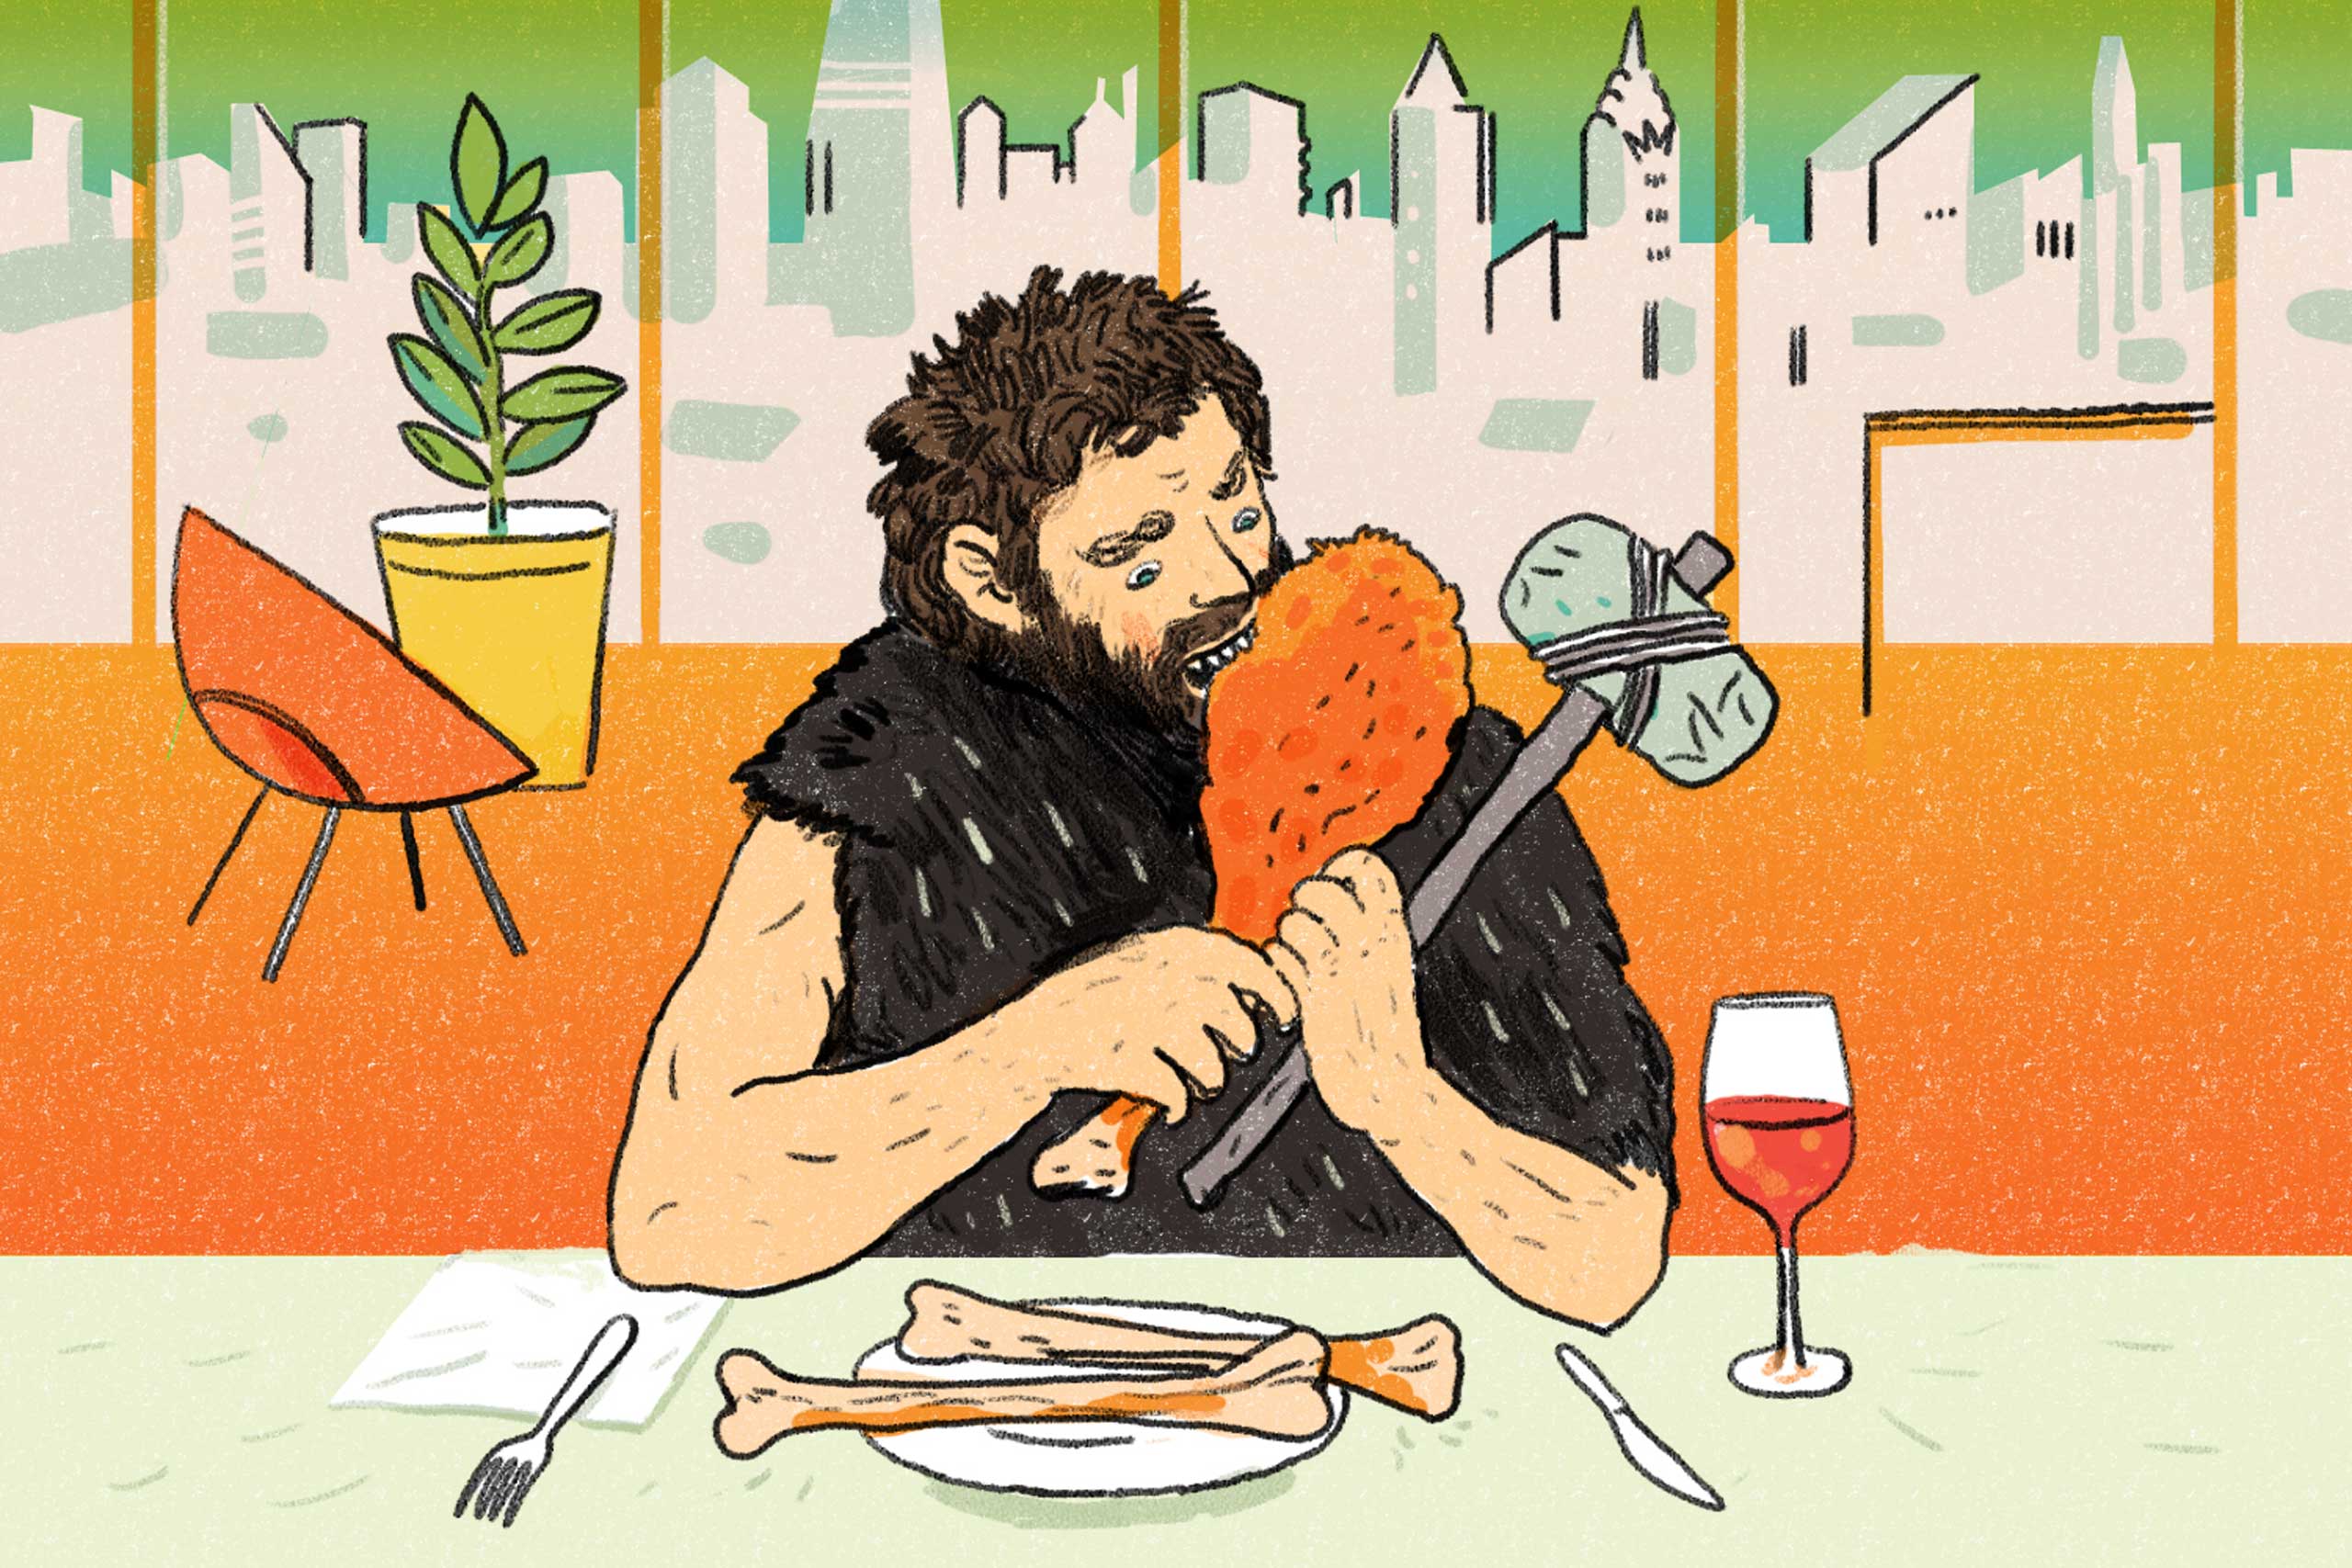 <strong><a href="http://time.com/3614394/paleo-diet" target="_blank">You Asked: Should I Go Paleo?</a></strong> The pros and cons of eating like a caveman. (Illustration by Peter Oumanski for TIME)